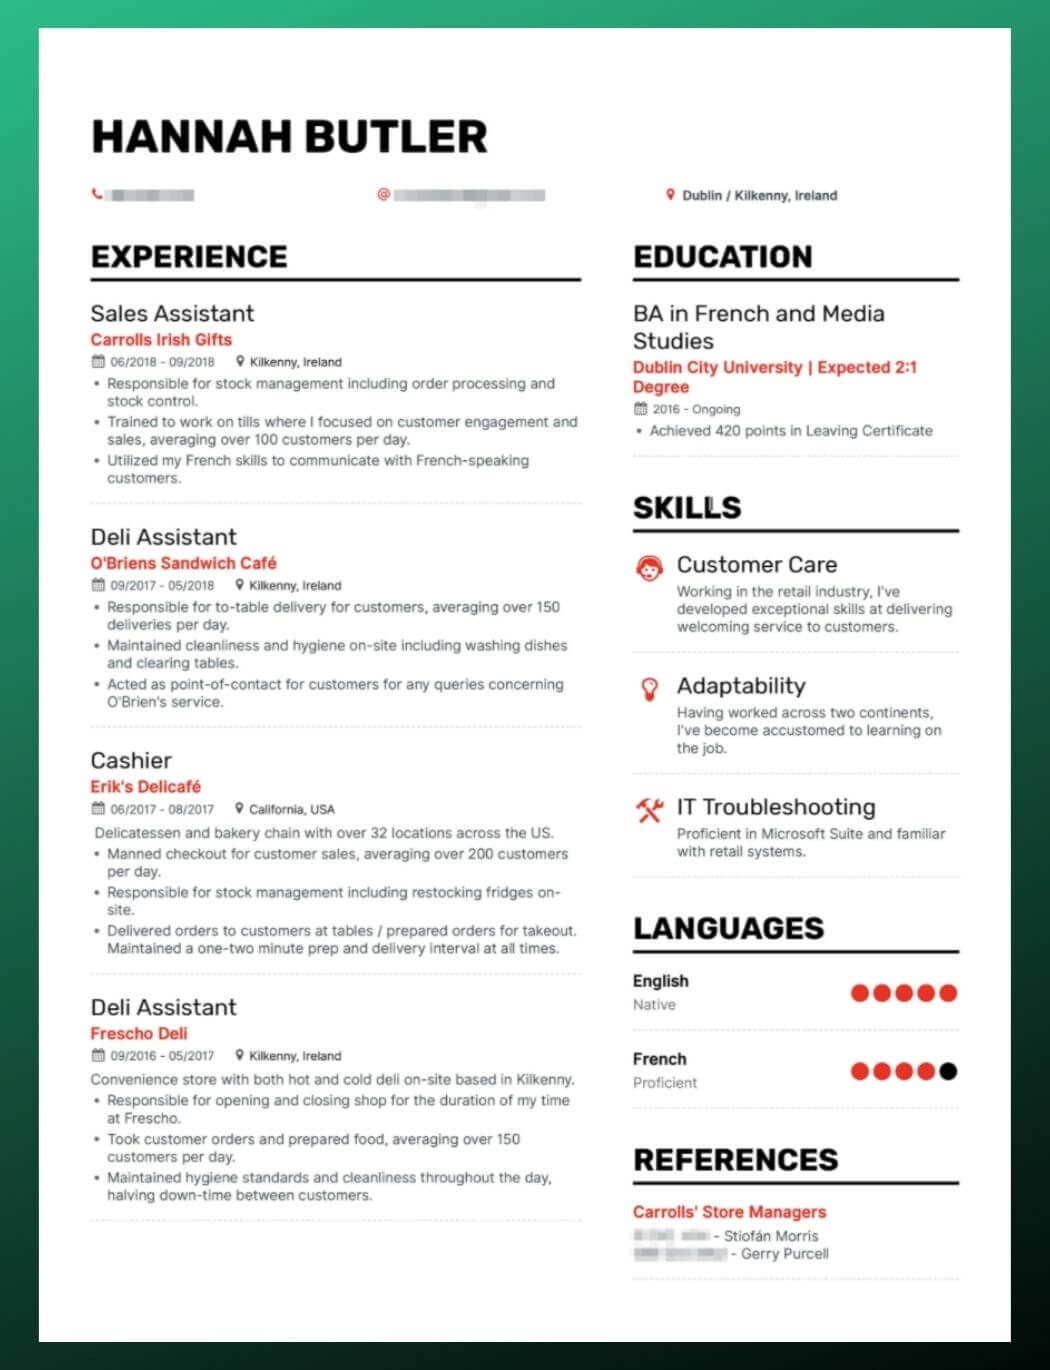 is the font georgia good for a resume